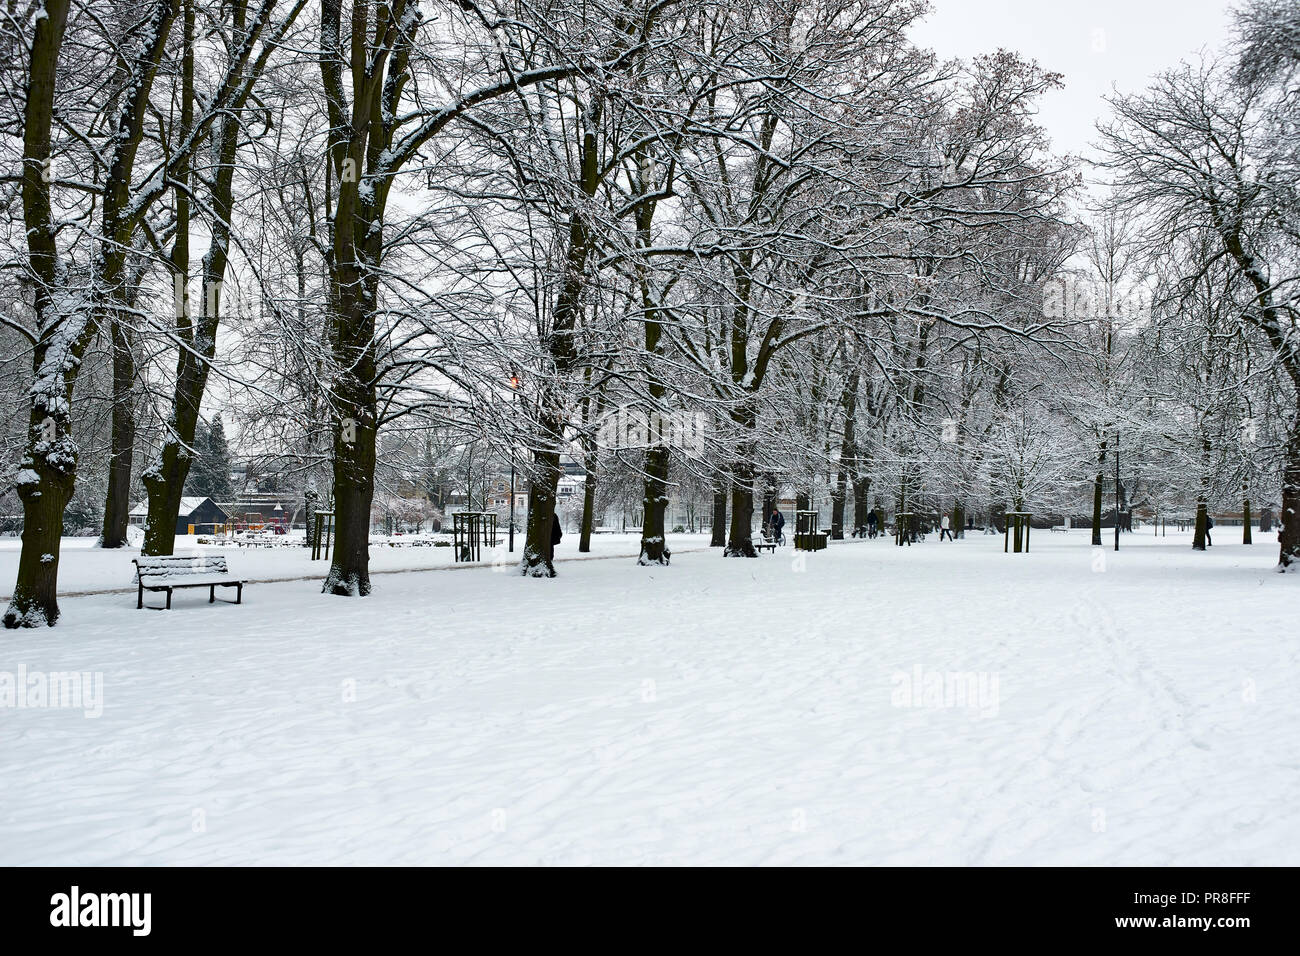 Winter Scene in Cambridge - Christ's Pieces. Snow covered lawns and garden, avenue of trees and benches. Stock Photo